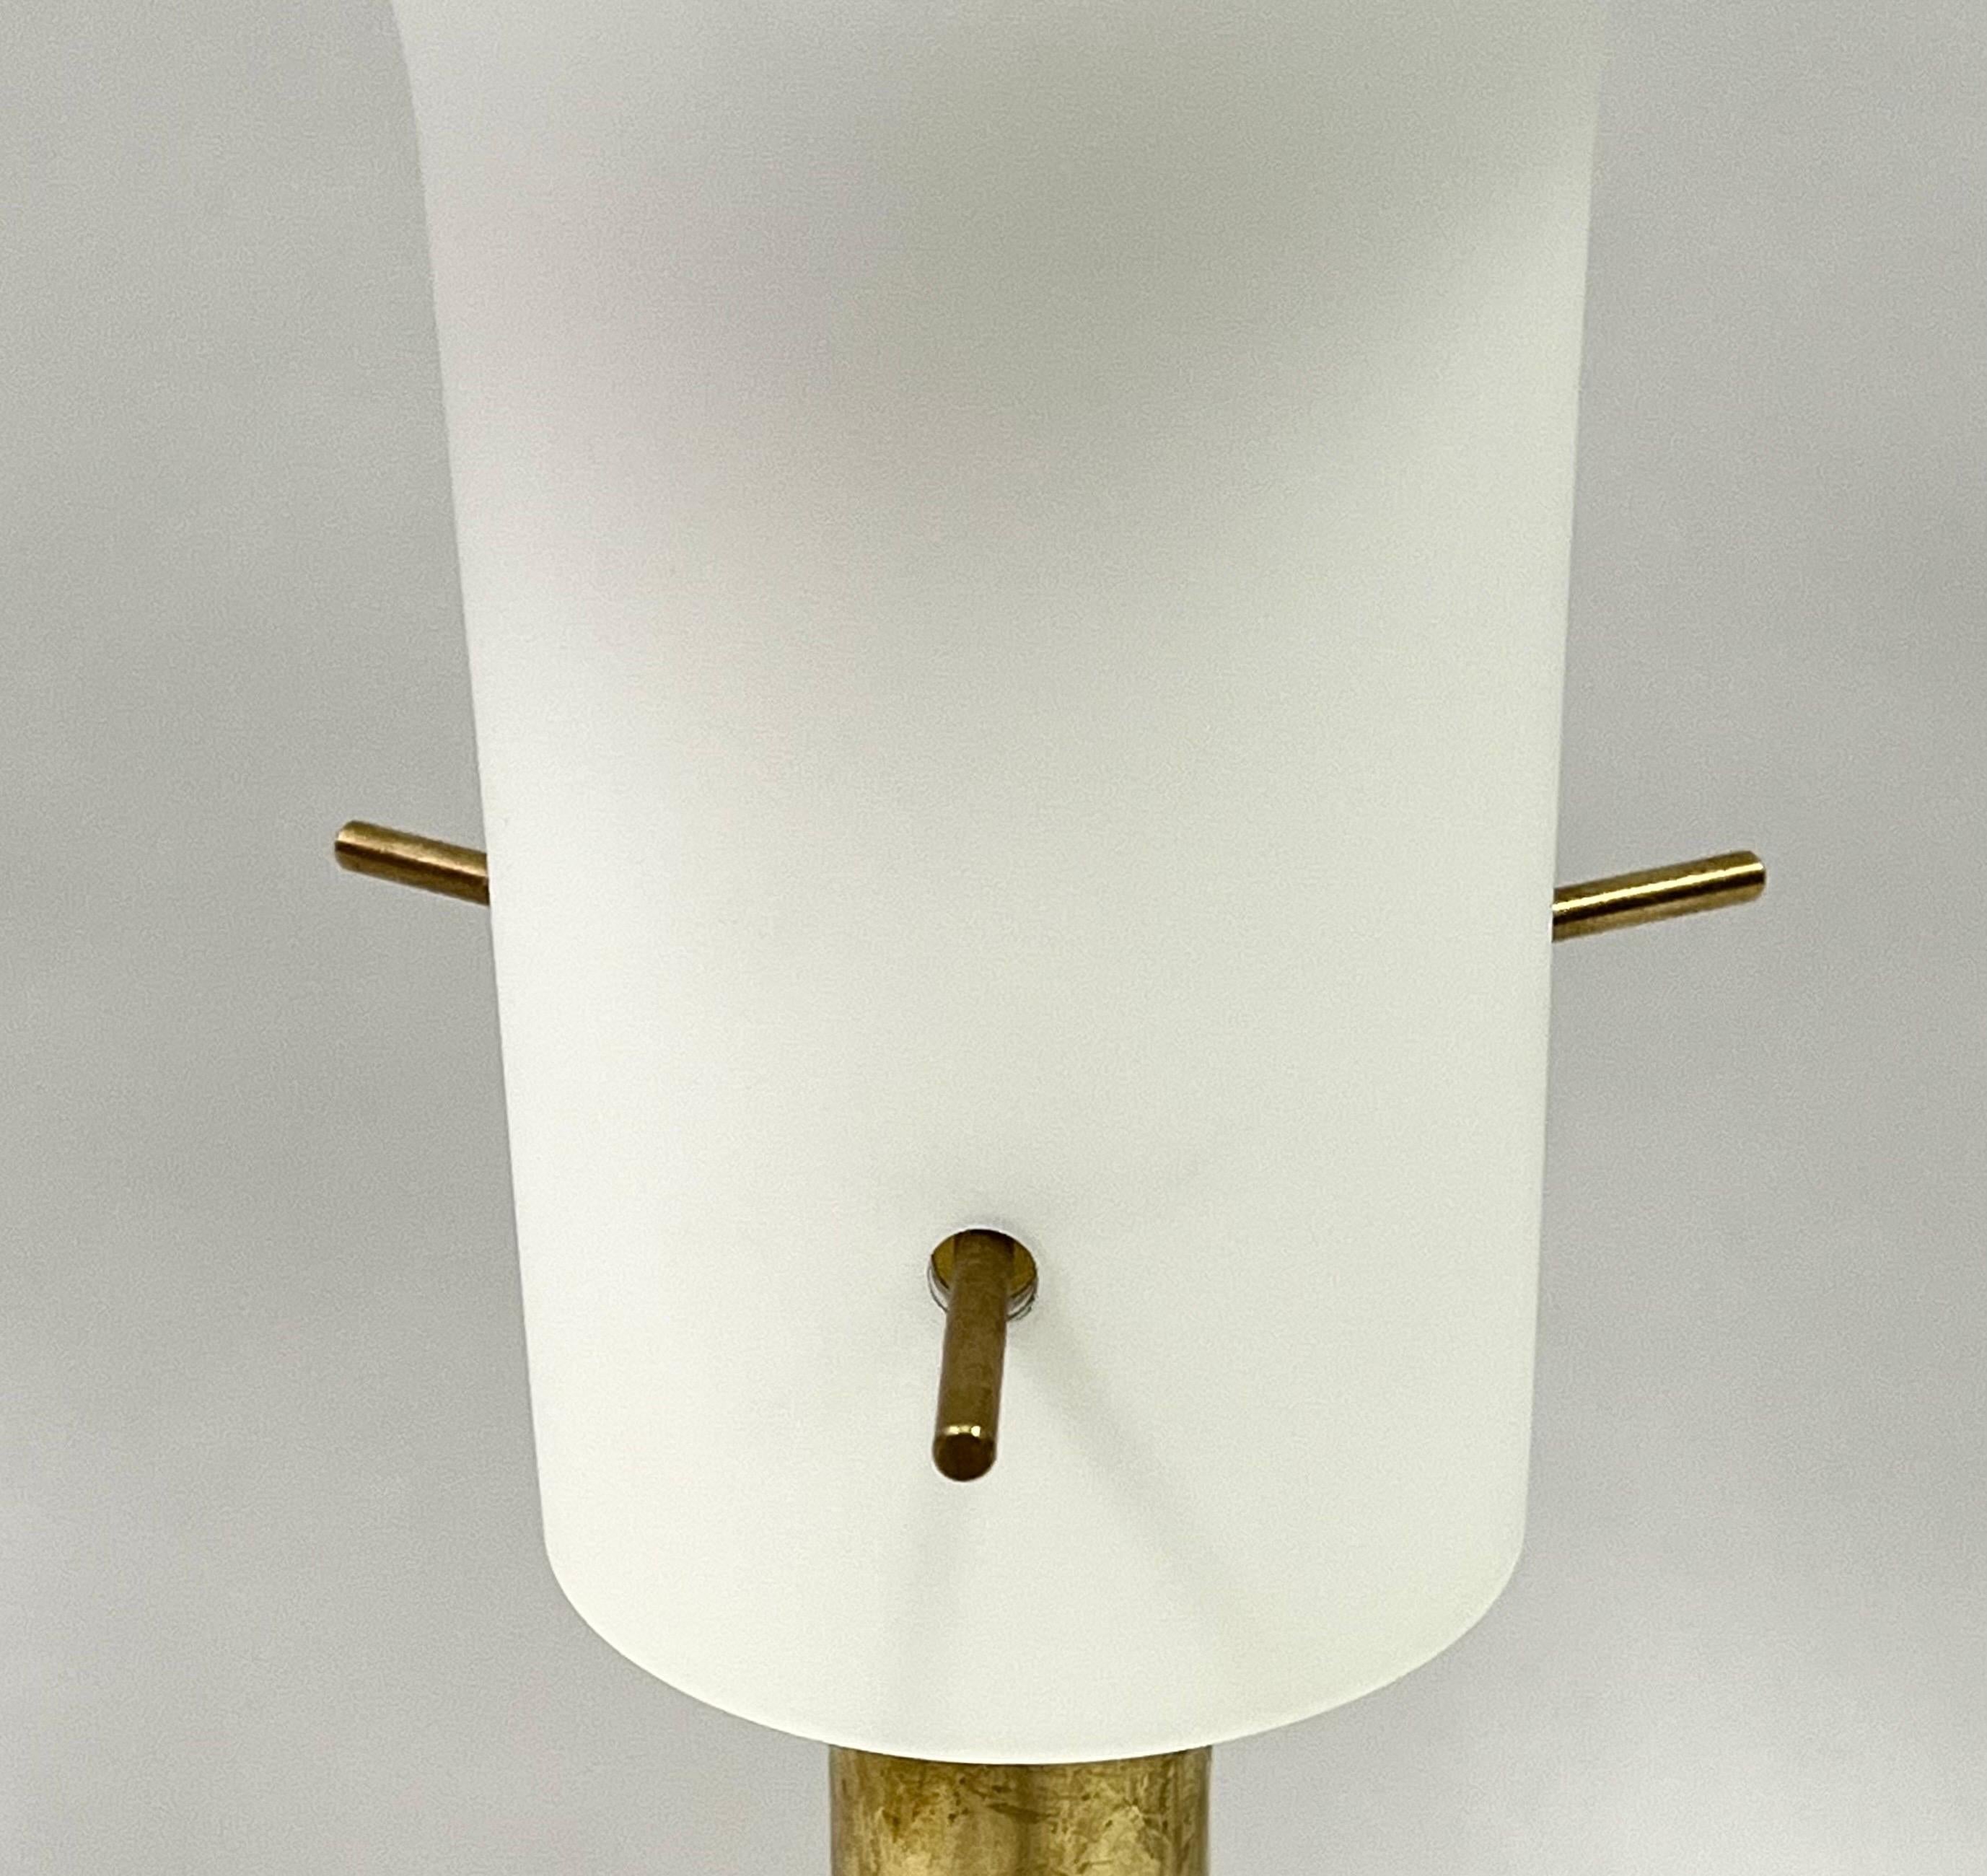 Pair of Italian Mid-Century Modern Brass Table Lamps, Max Ingrand & Fontana Arte For Sale 1